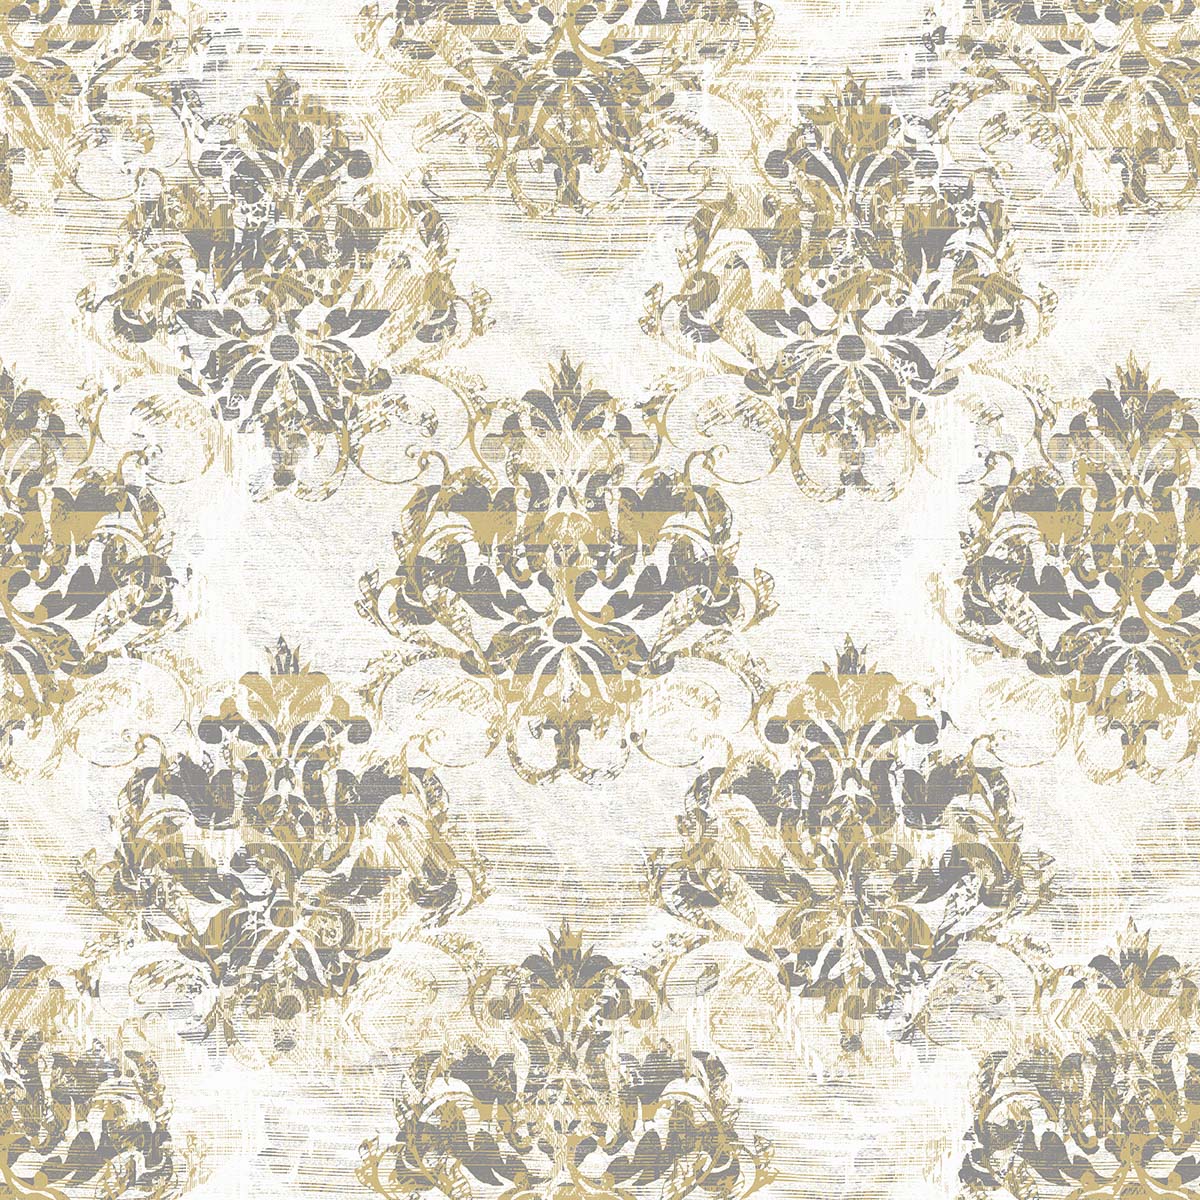 A pattern of gold and grey flowers